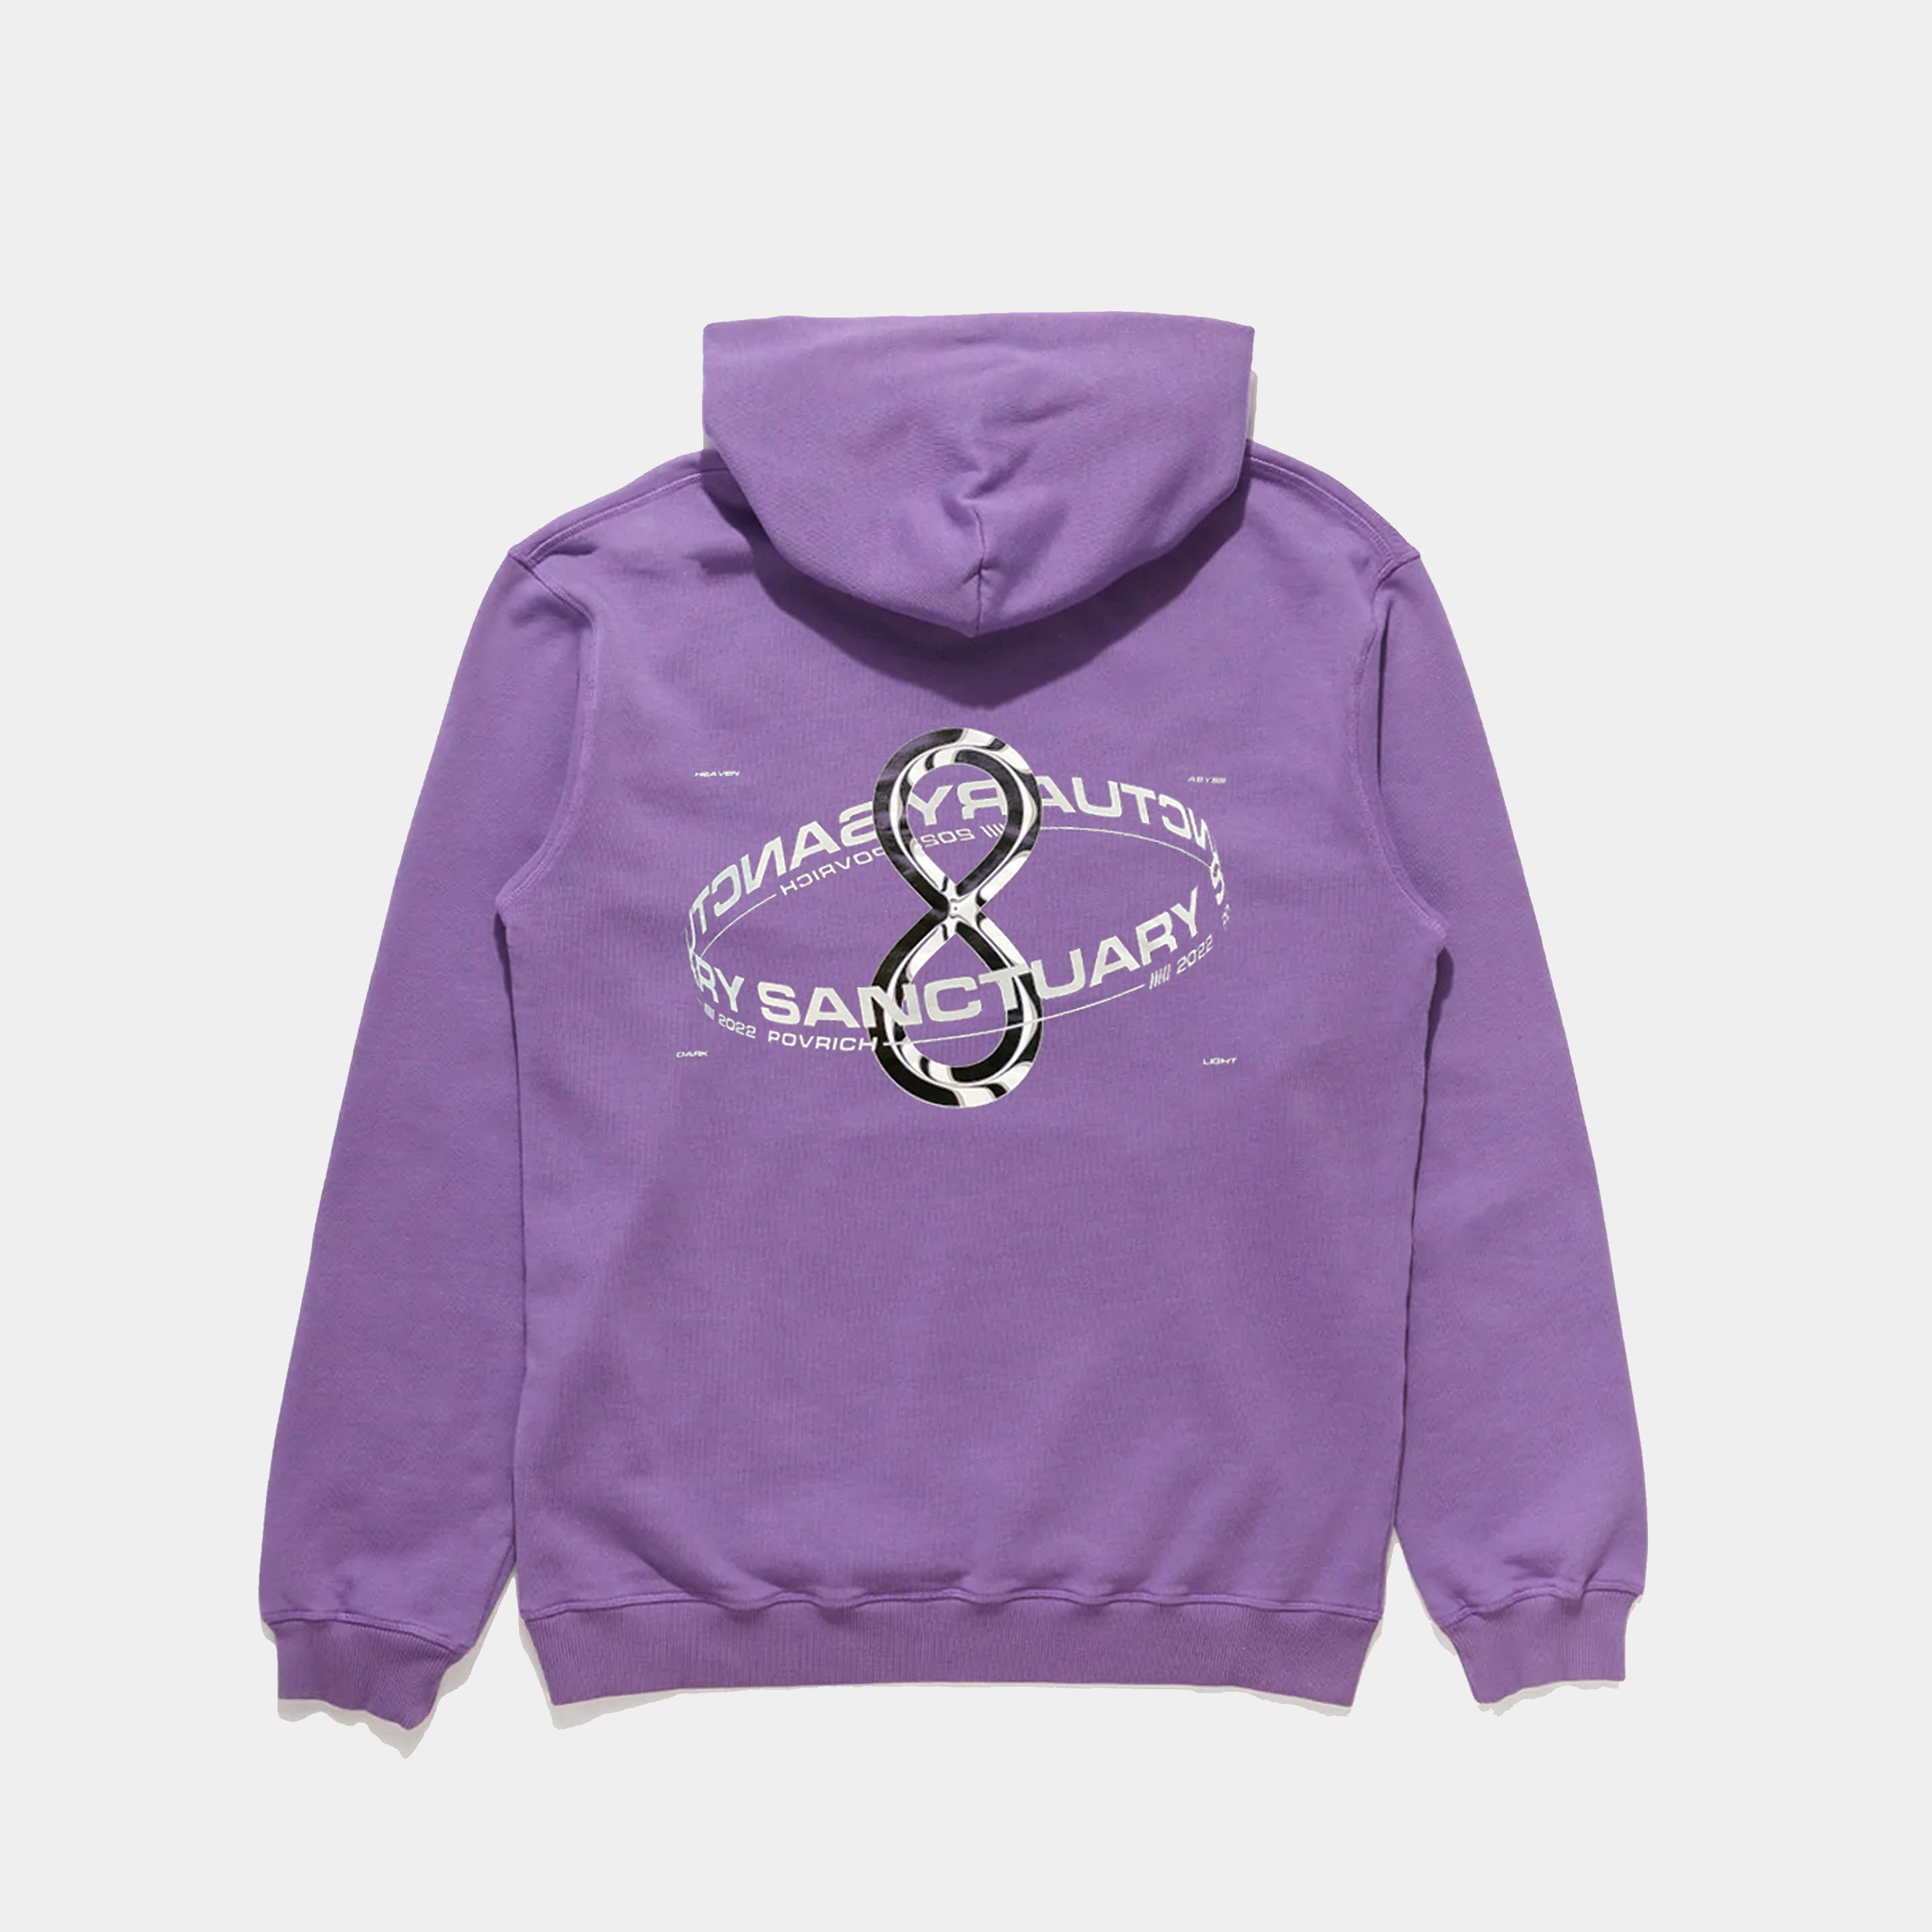 Purple hoodie with a sleek design, perfect for streetwear and everyday wear. Made from high-quality materials for maximum comfort and durability.